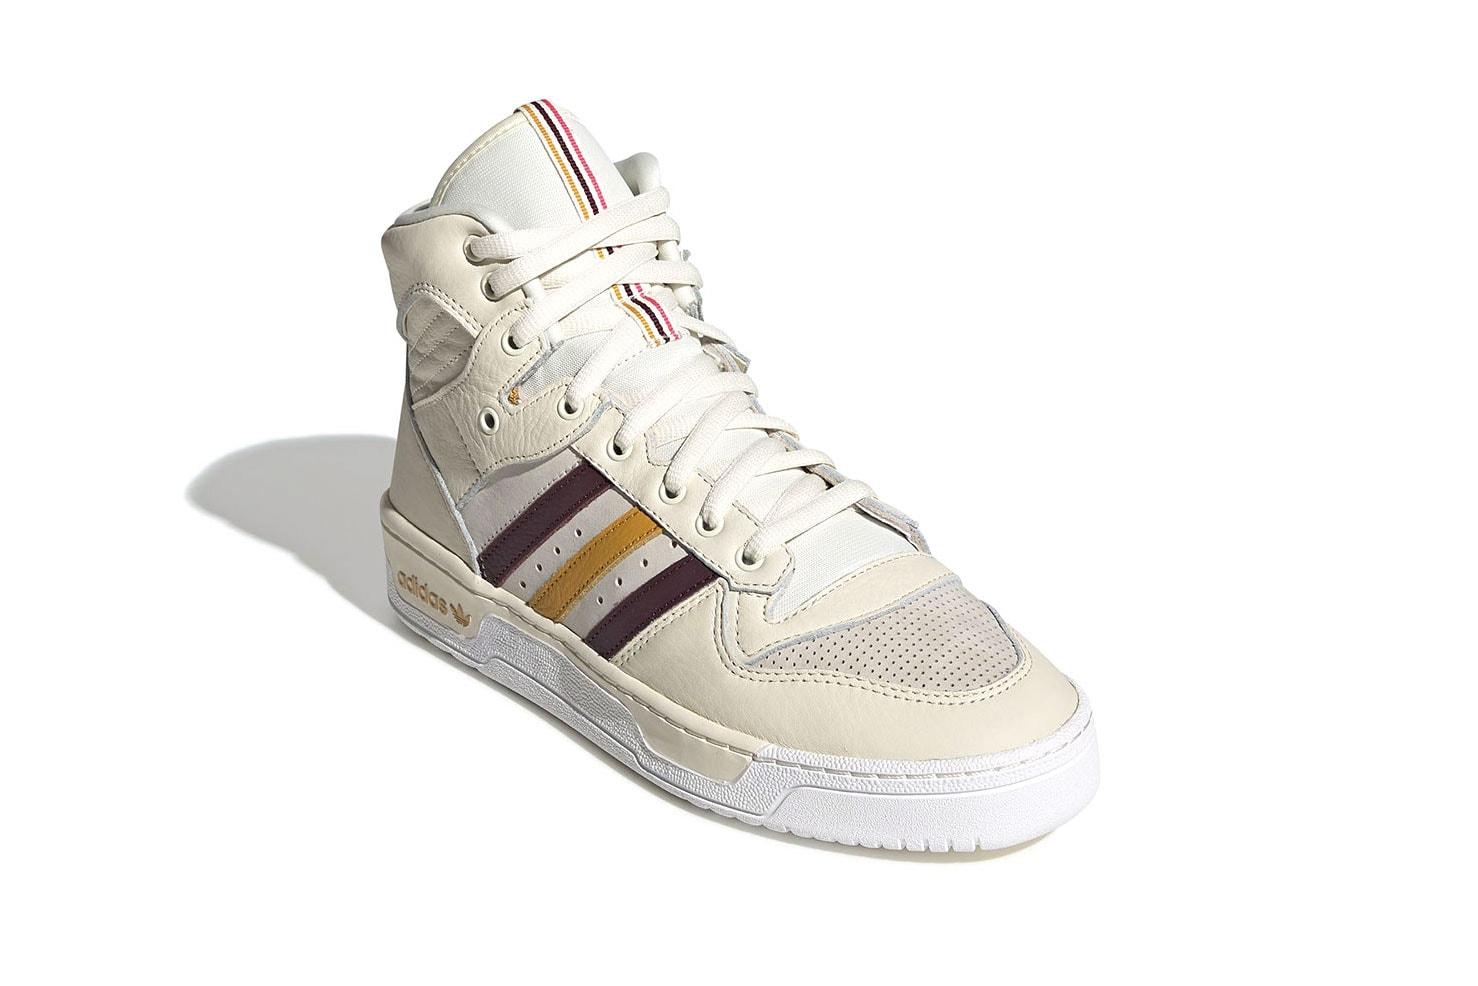 eric emanuel x adidas Rivalry Hi "Crystal White/Bold Gold" Release Date info price colorway sneaker december 2018 Color: Crystal White/Night Red/Real Pink/Bold Gold Style Code: G25836